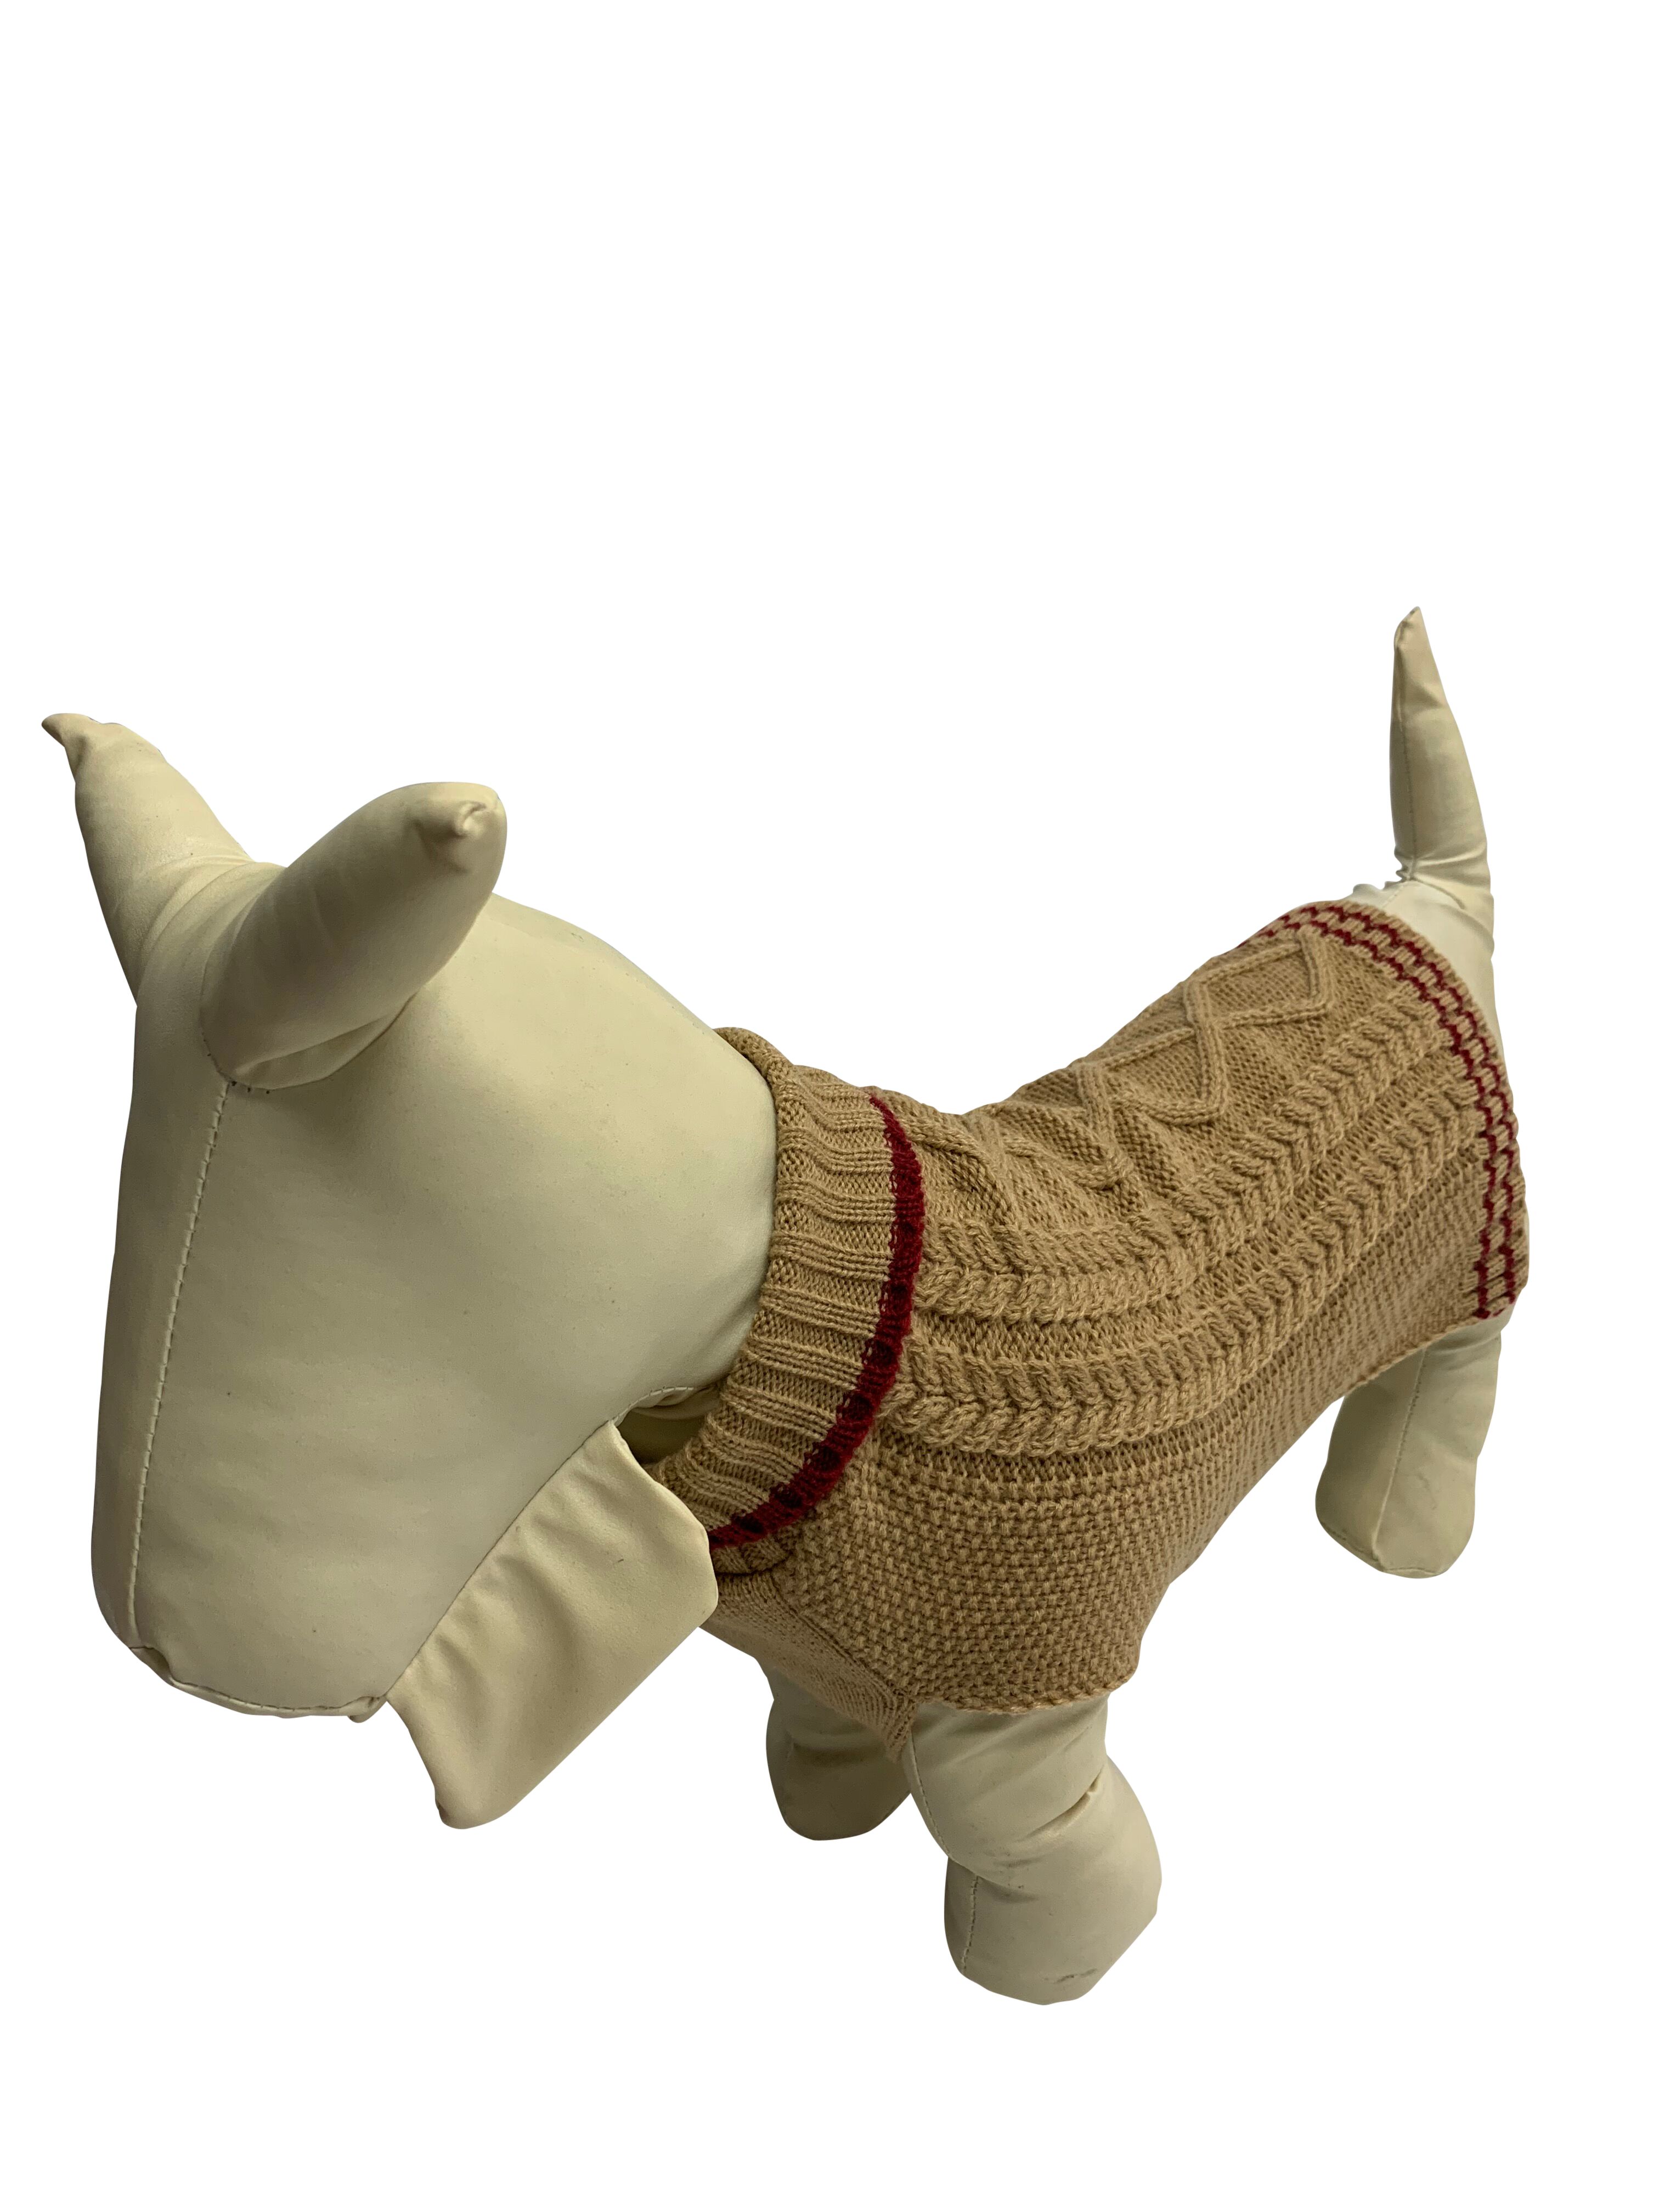 Pet Dog Beige With Red Sweater - XL